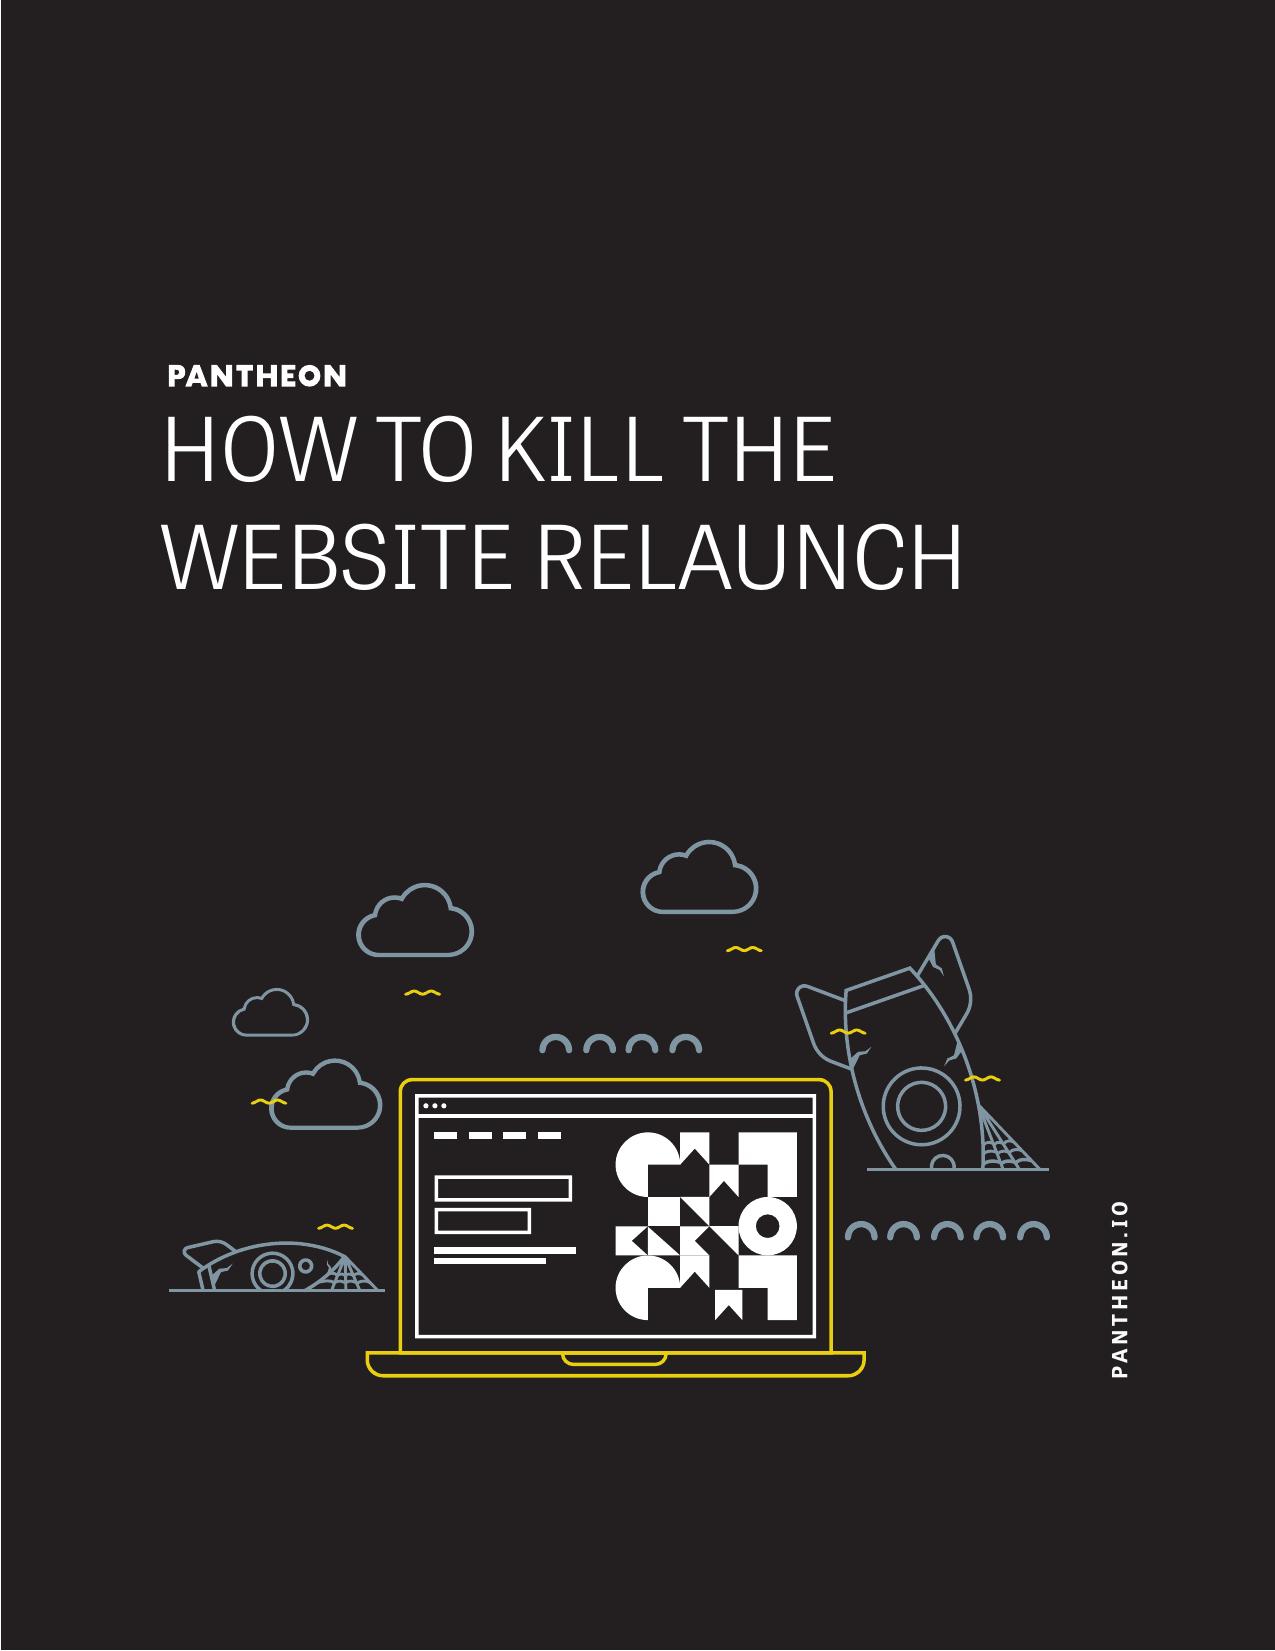 How to Kill Website Relaunch